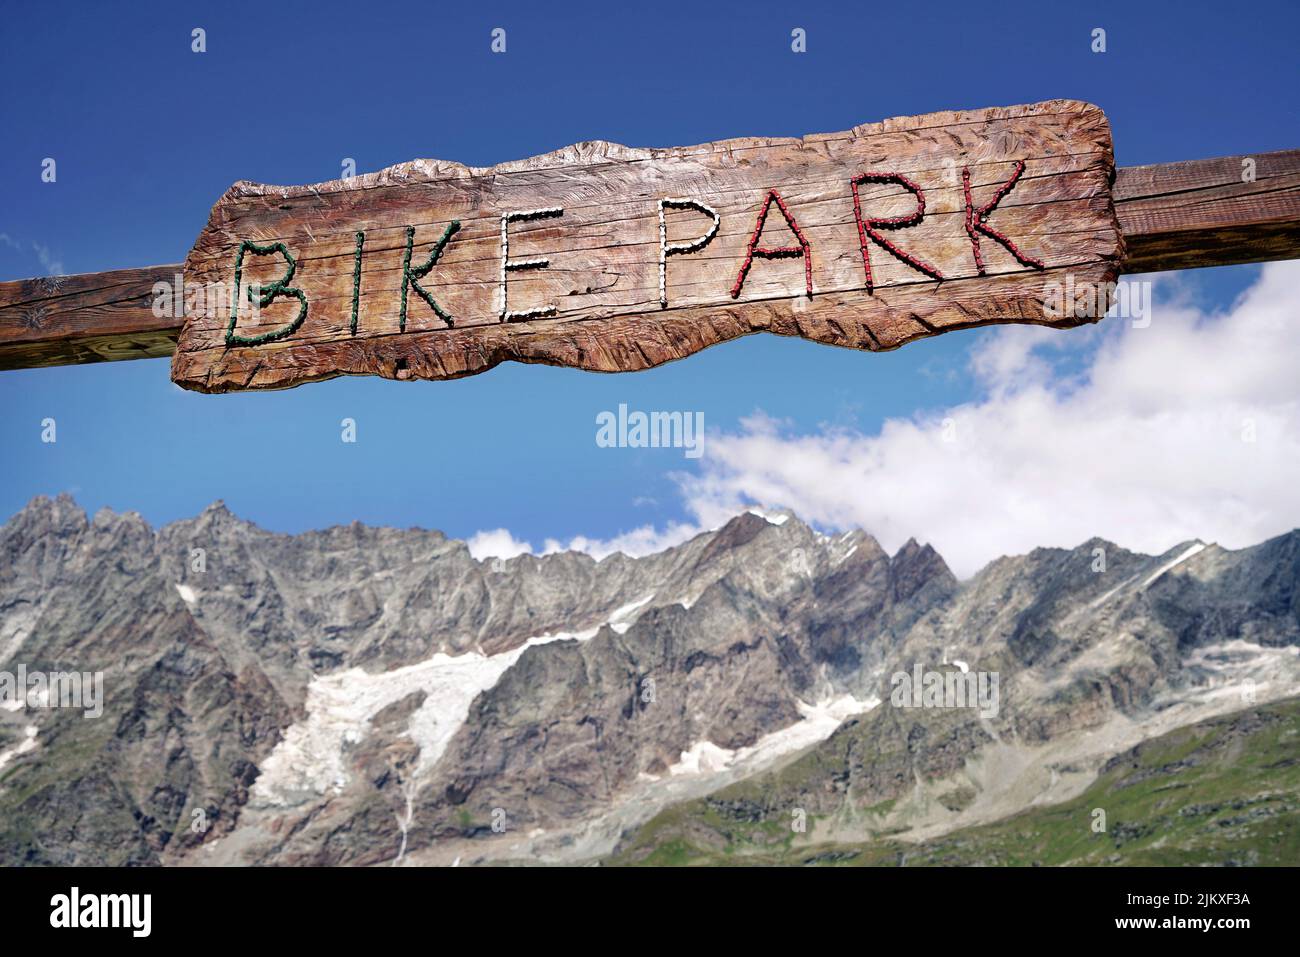 The Matterhorn Valley bike park is the highest in Europe and has slopes with all levels of difficulty.  Breuil-Cervinia, Italy - August 2022 Stock Photo